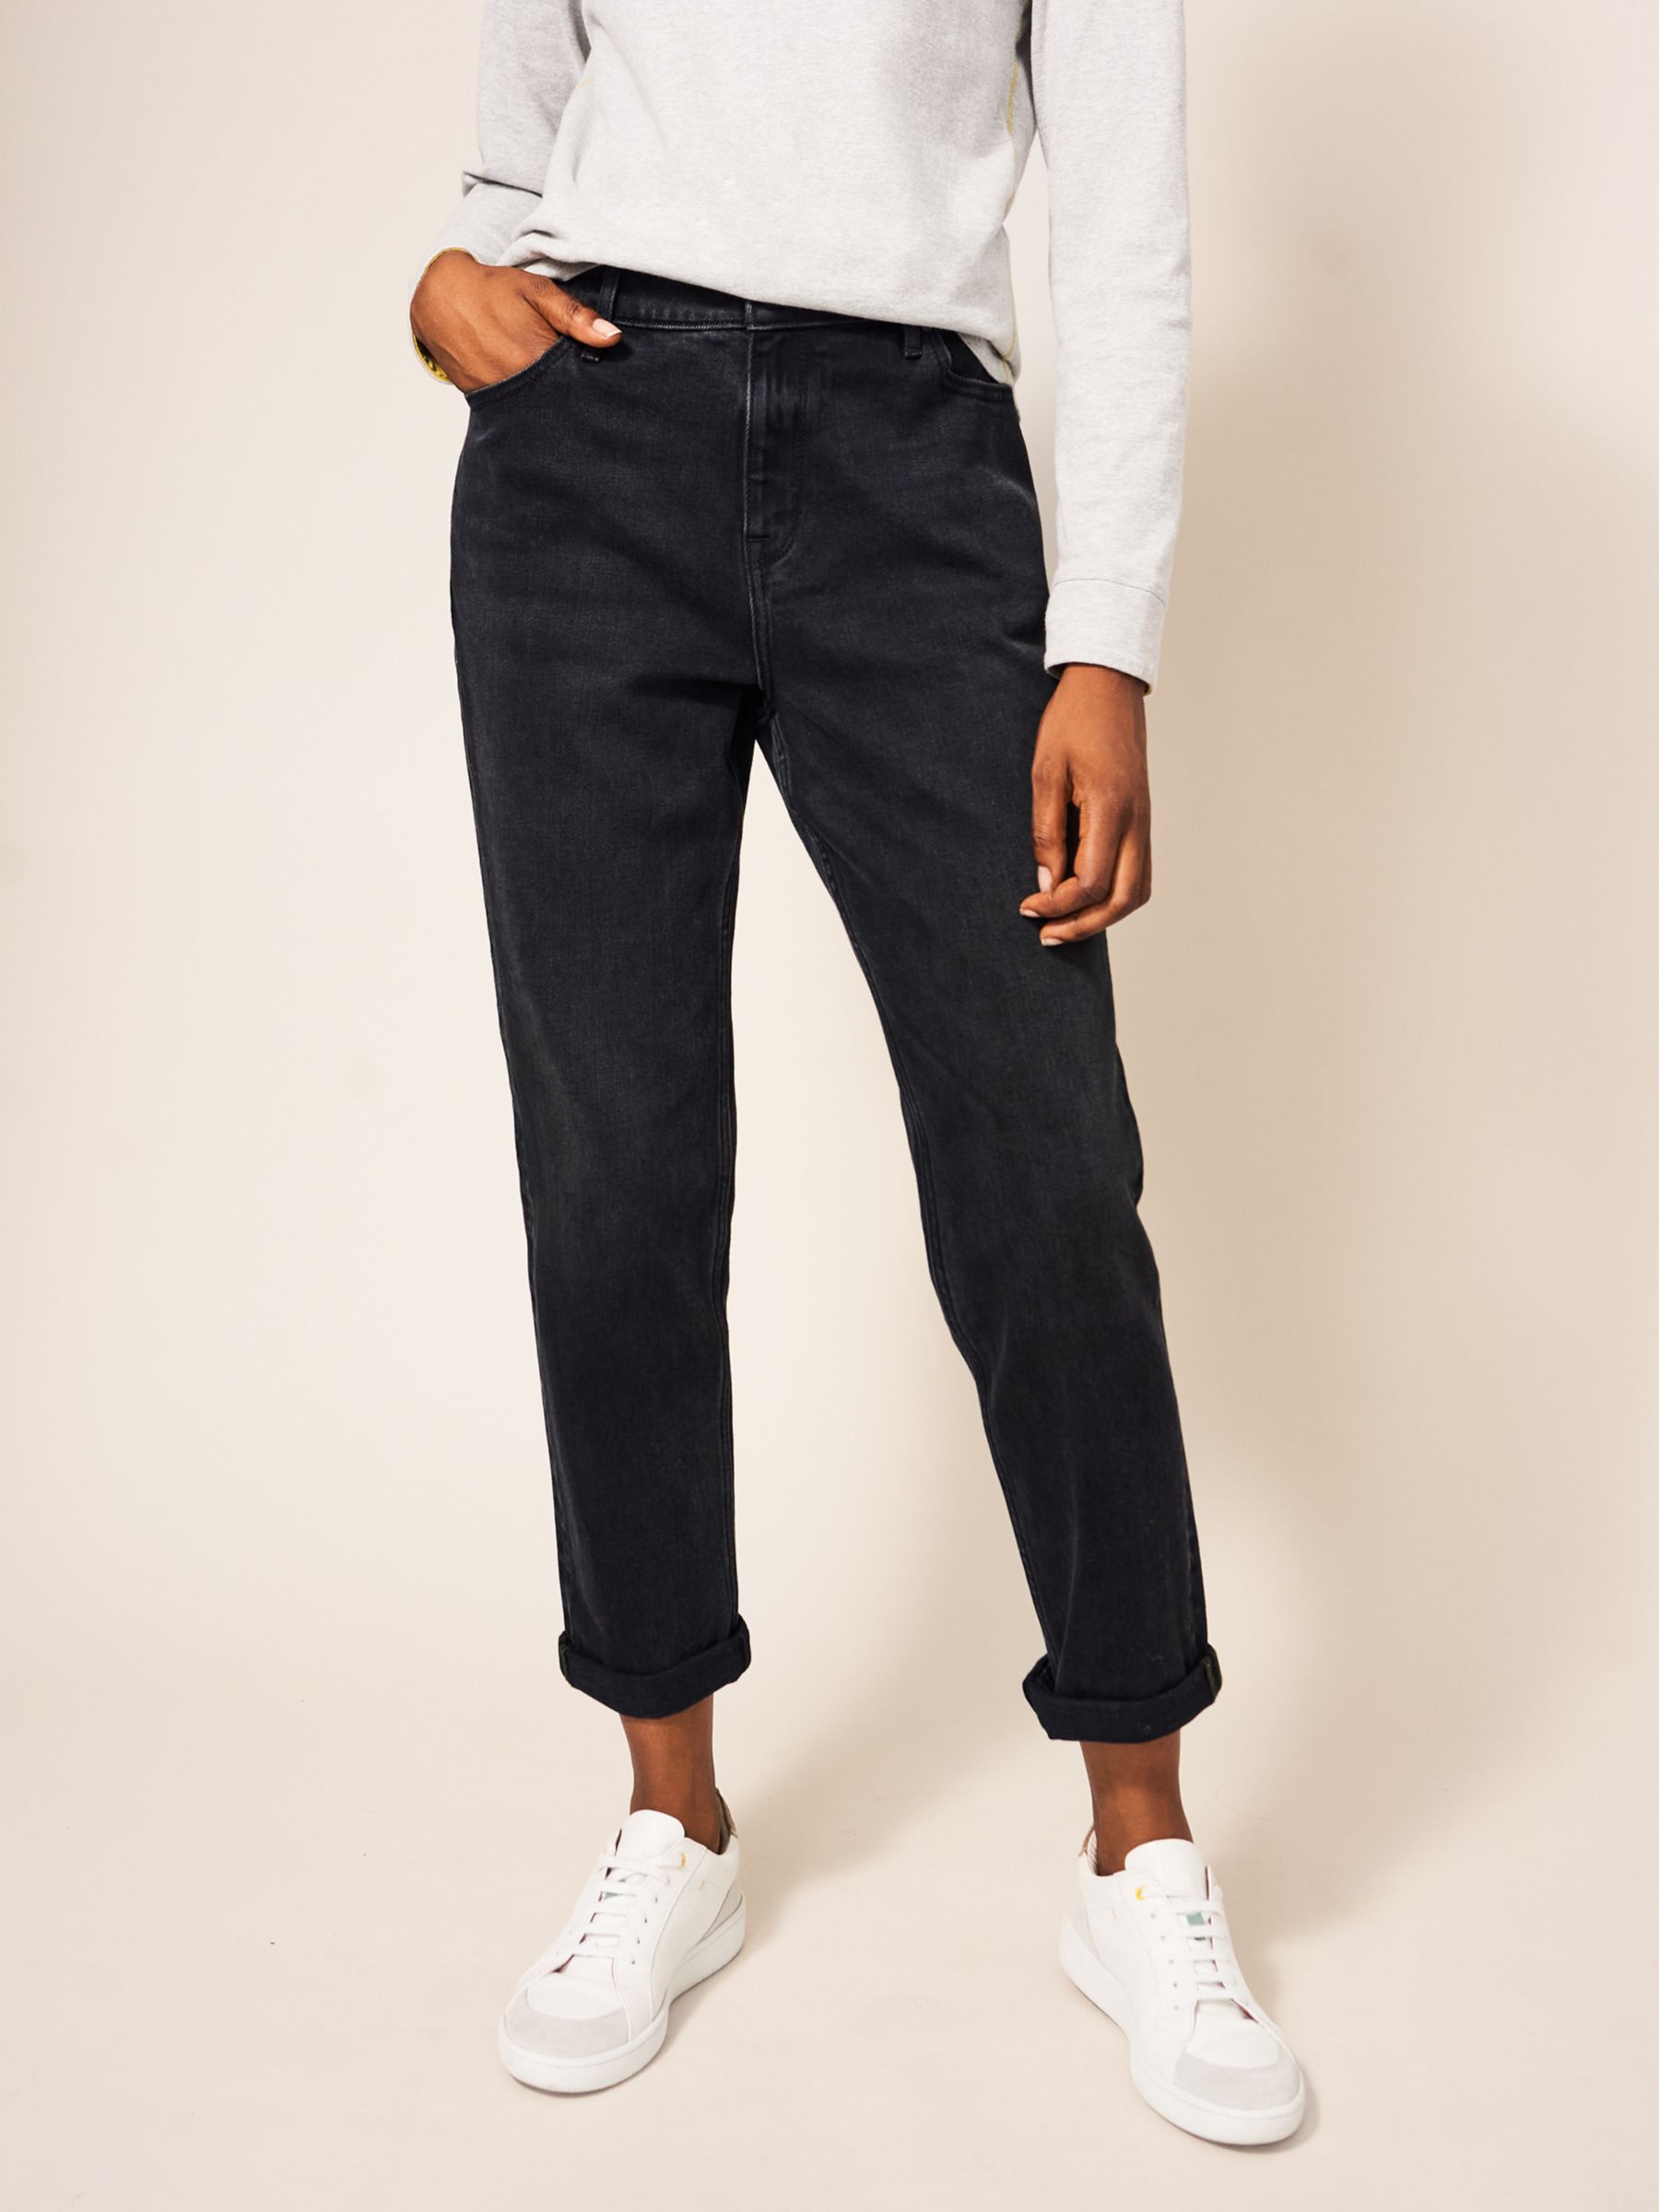 White Stuff Katy Relaxed Slim Jeans, Washed Black, 10R